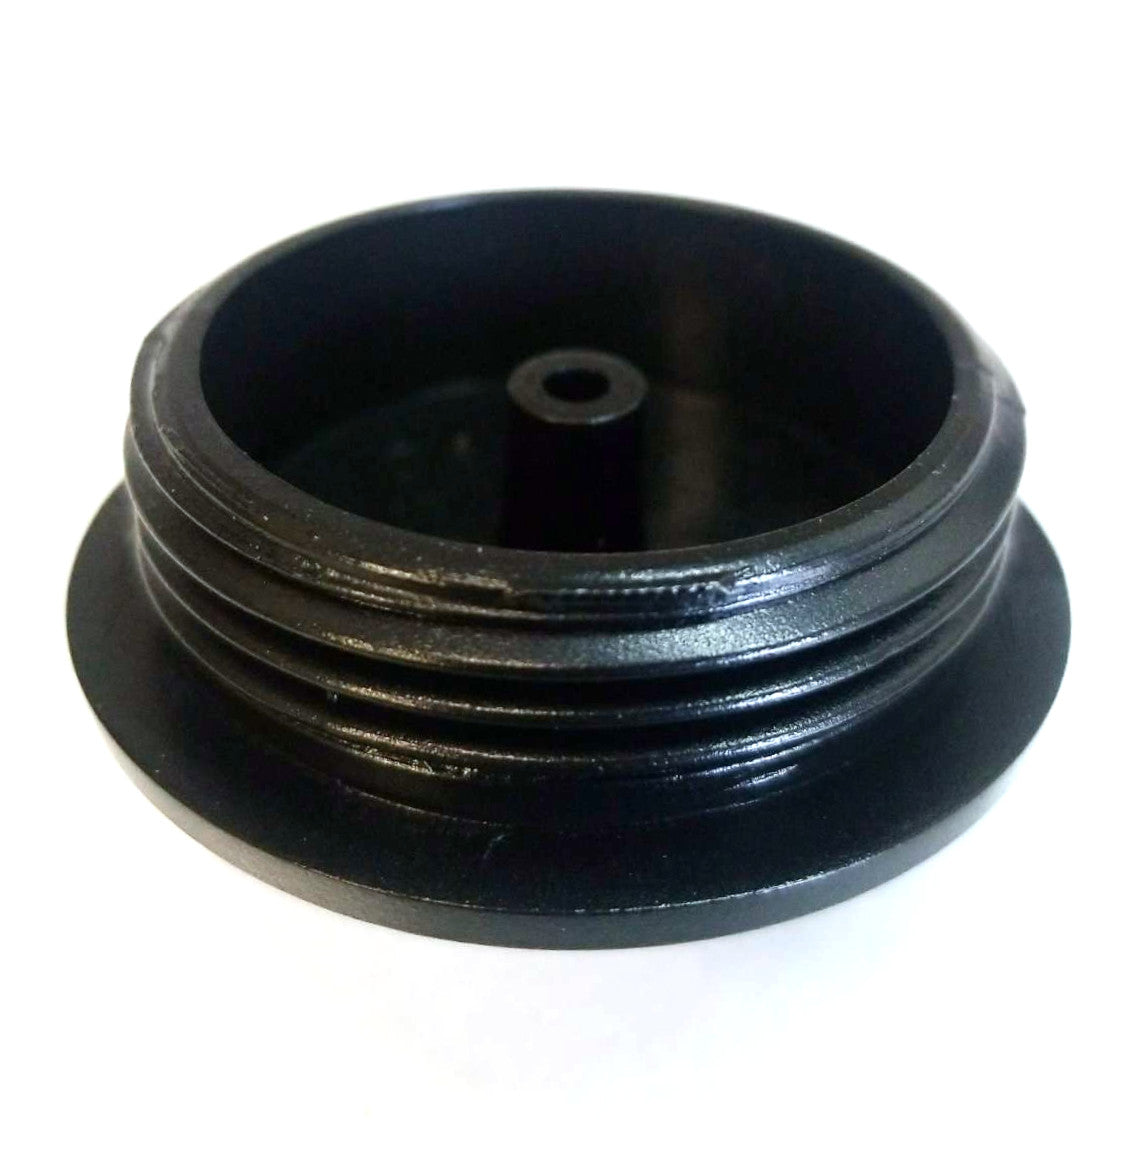 Aftermarket Marine Boat Replacement Gas Deck Fill Cap replaces Seachoice 32501